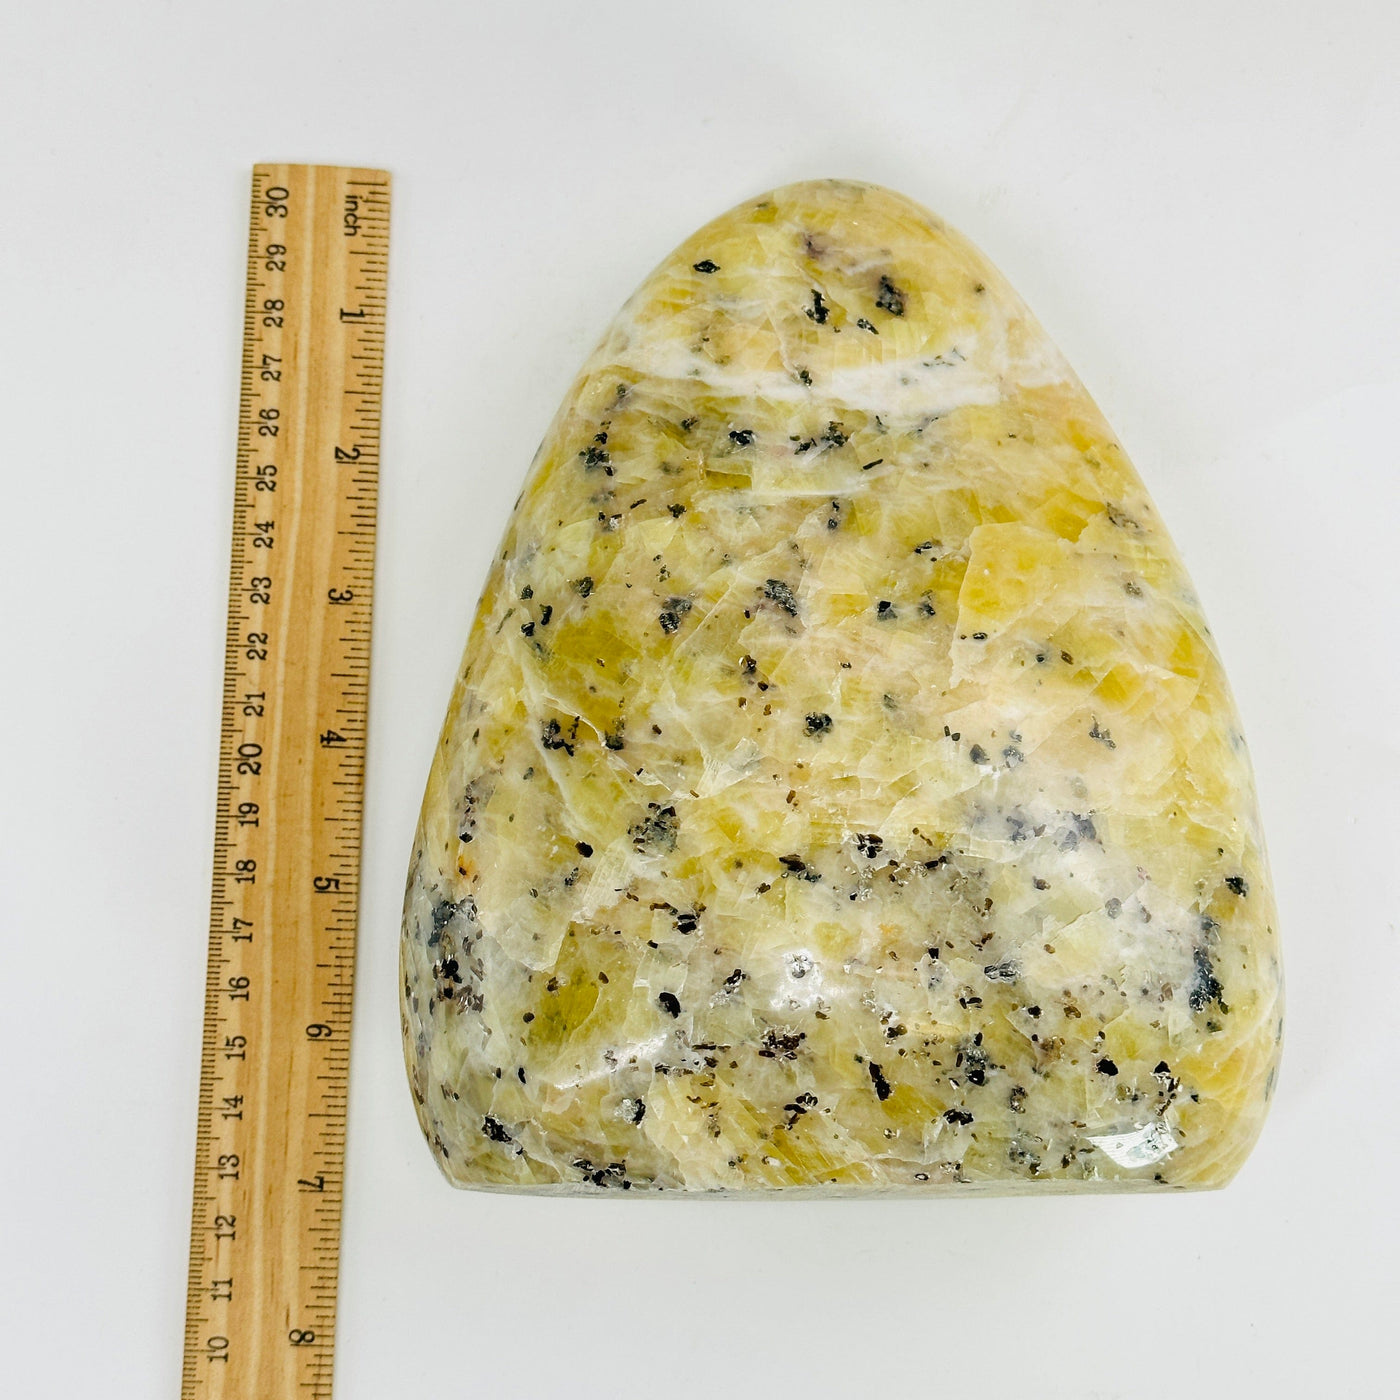 dendrite opal cut base next to a ruler for size reference